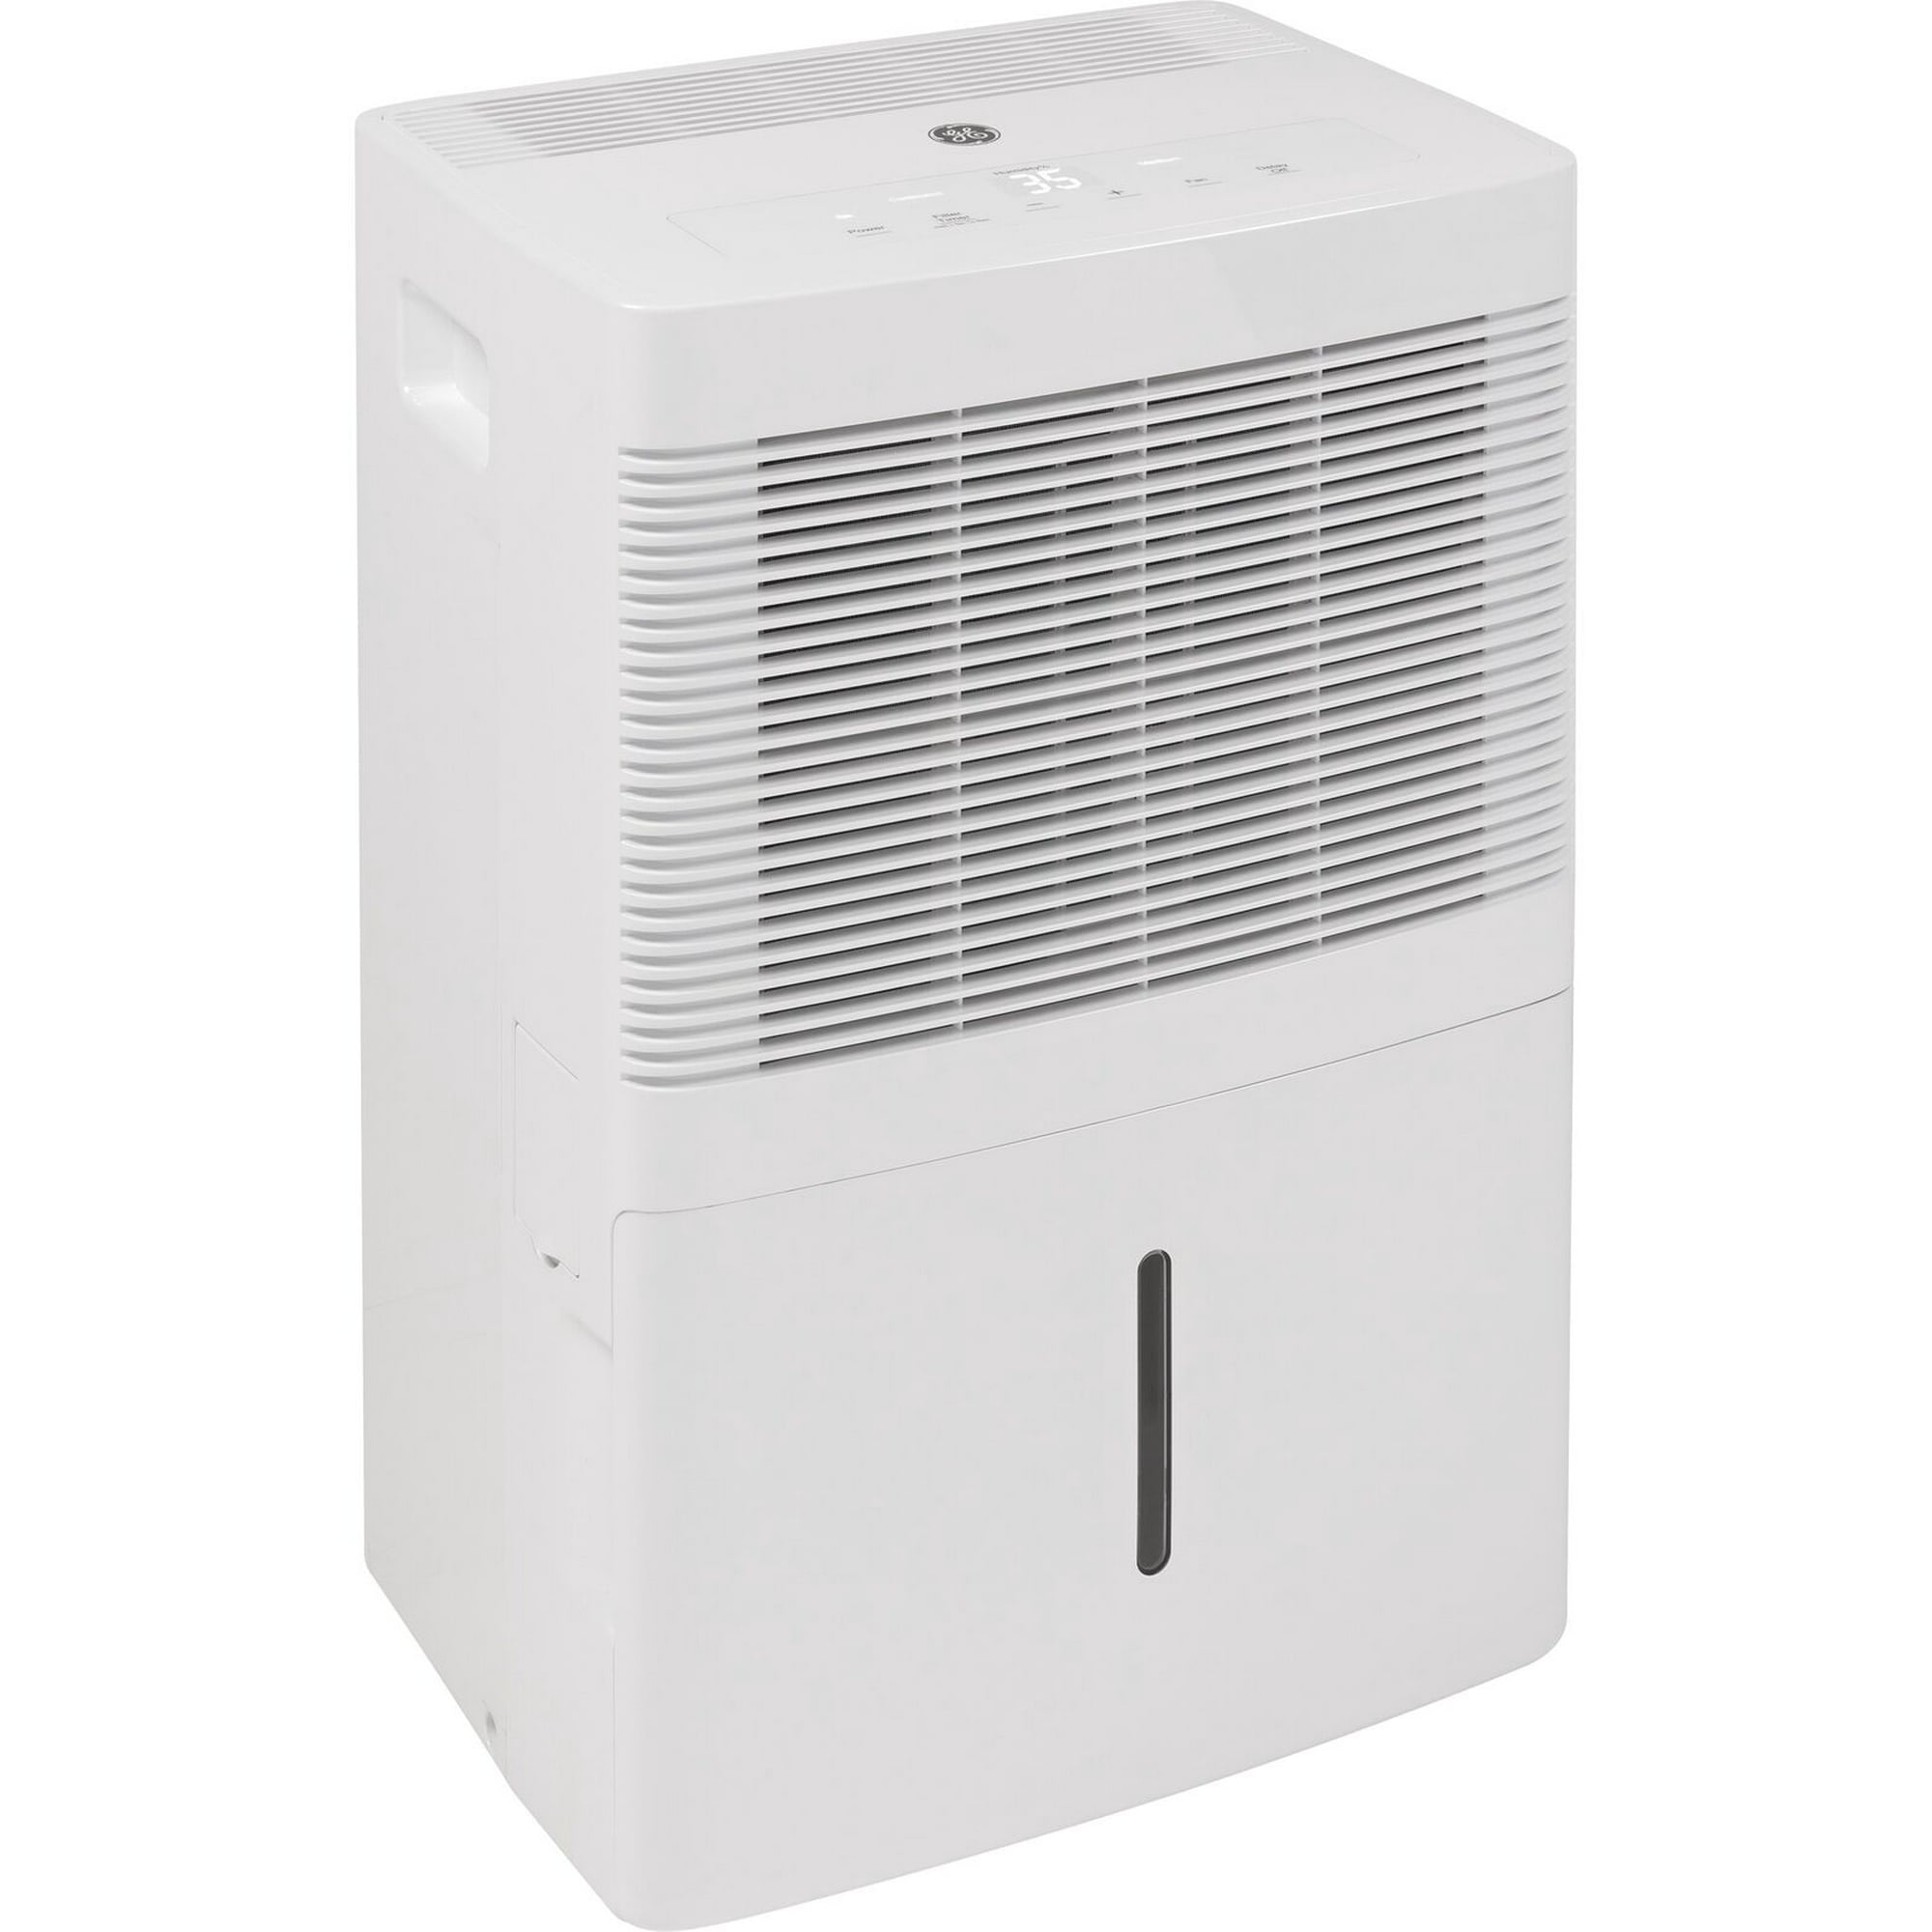 Restored General Electric 20-Pint Portable Dehumidifier with Drain, White (Factory Refurbished)